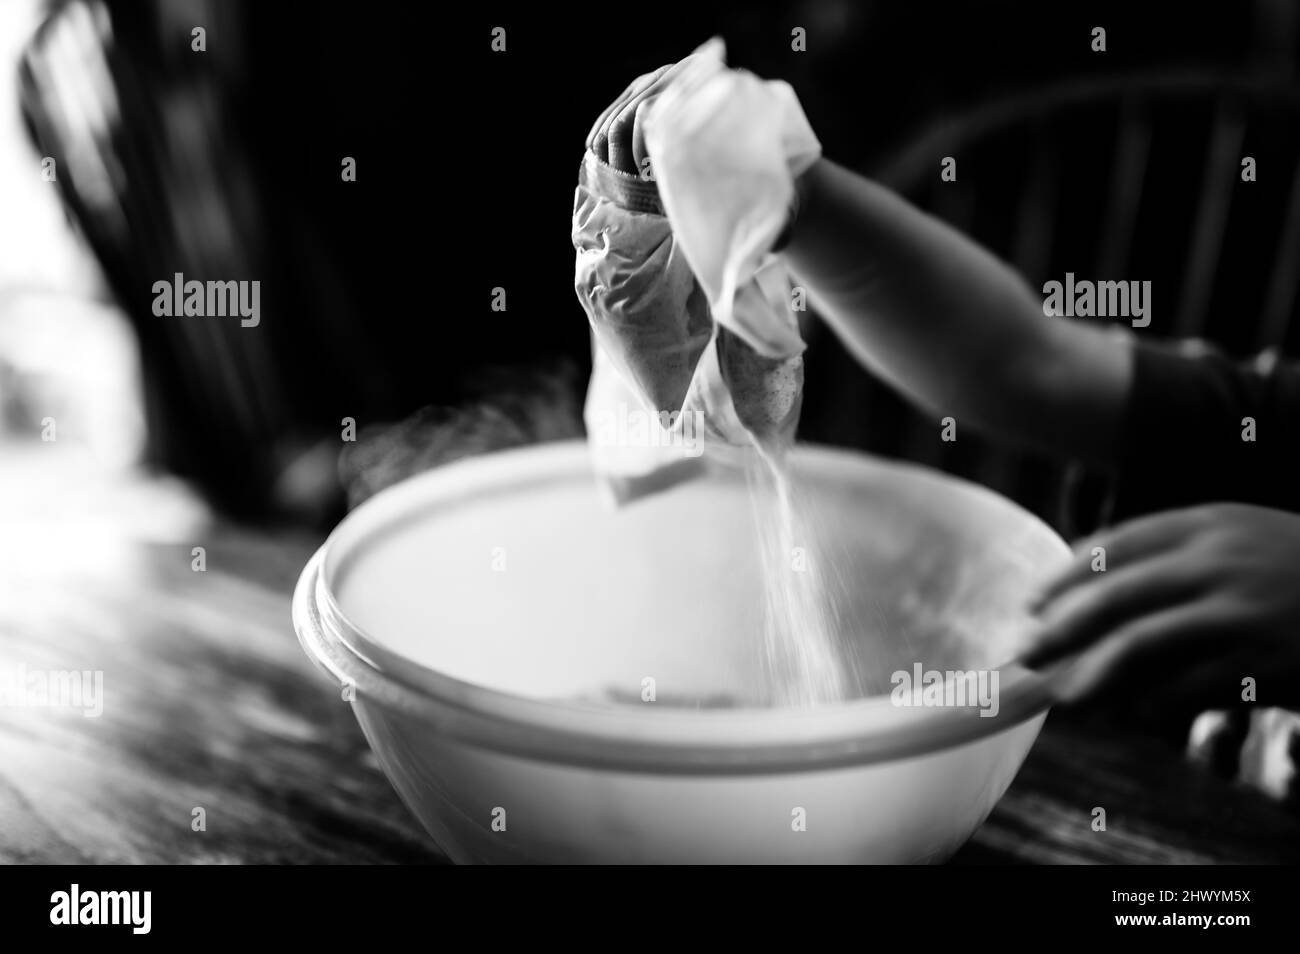 Little child dumping ingredients into a bowl causing dust to rise into the air. Stock Photo